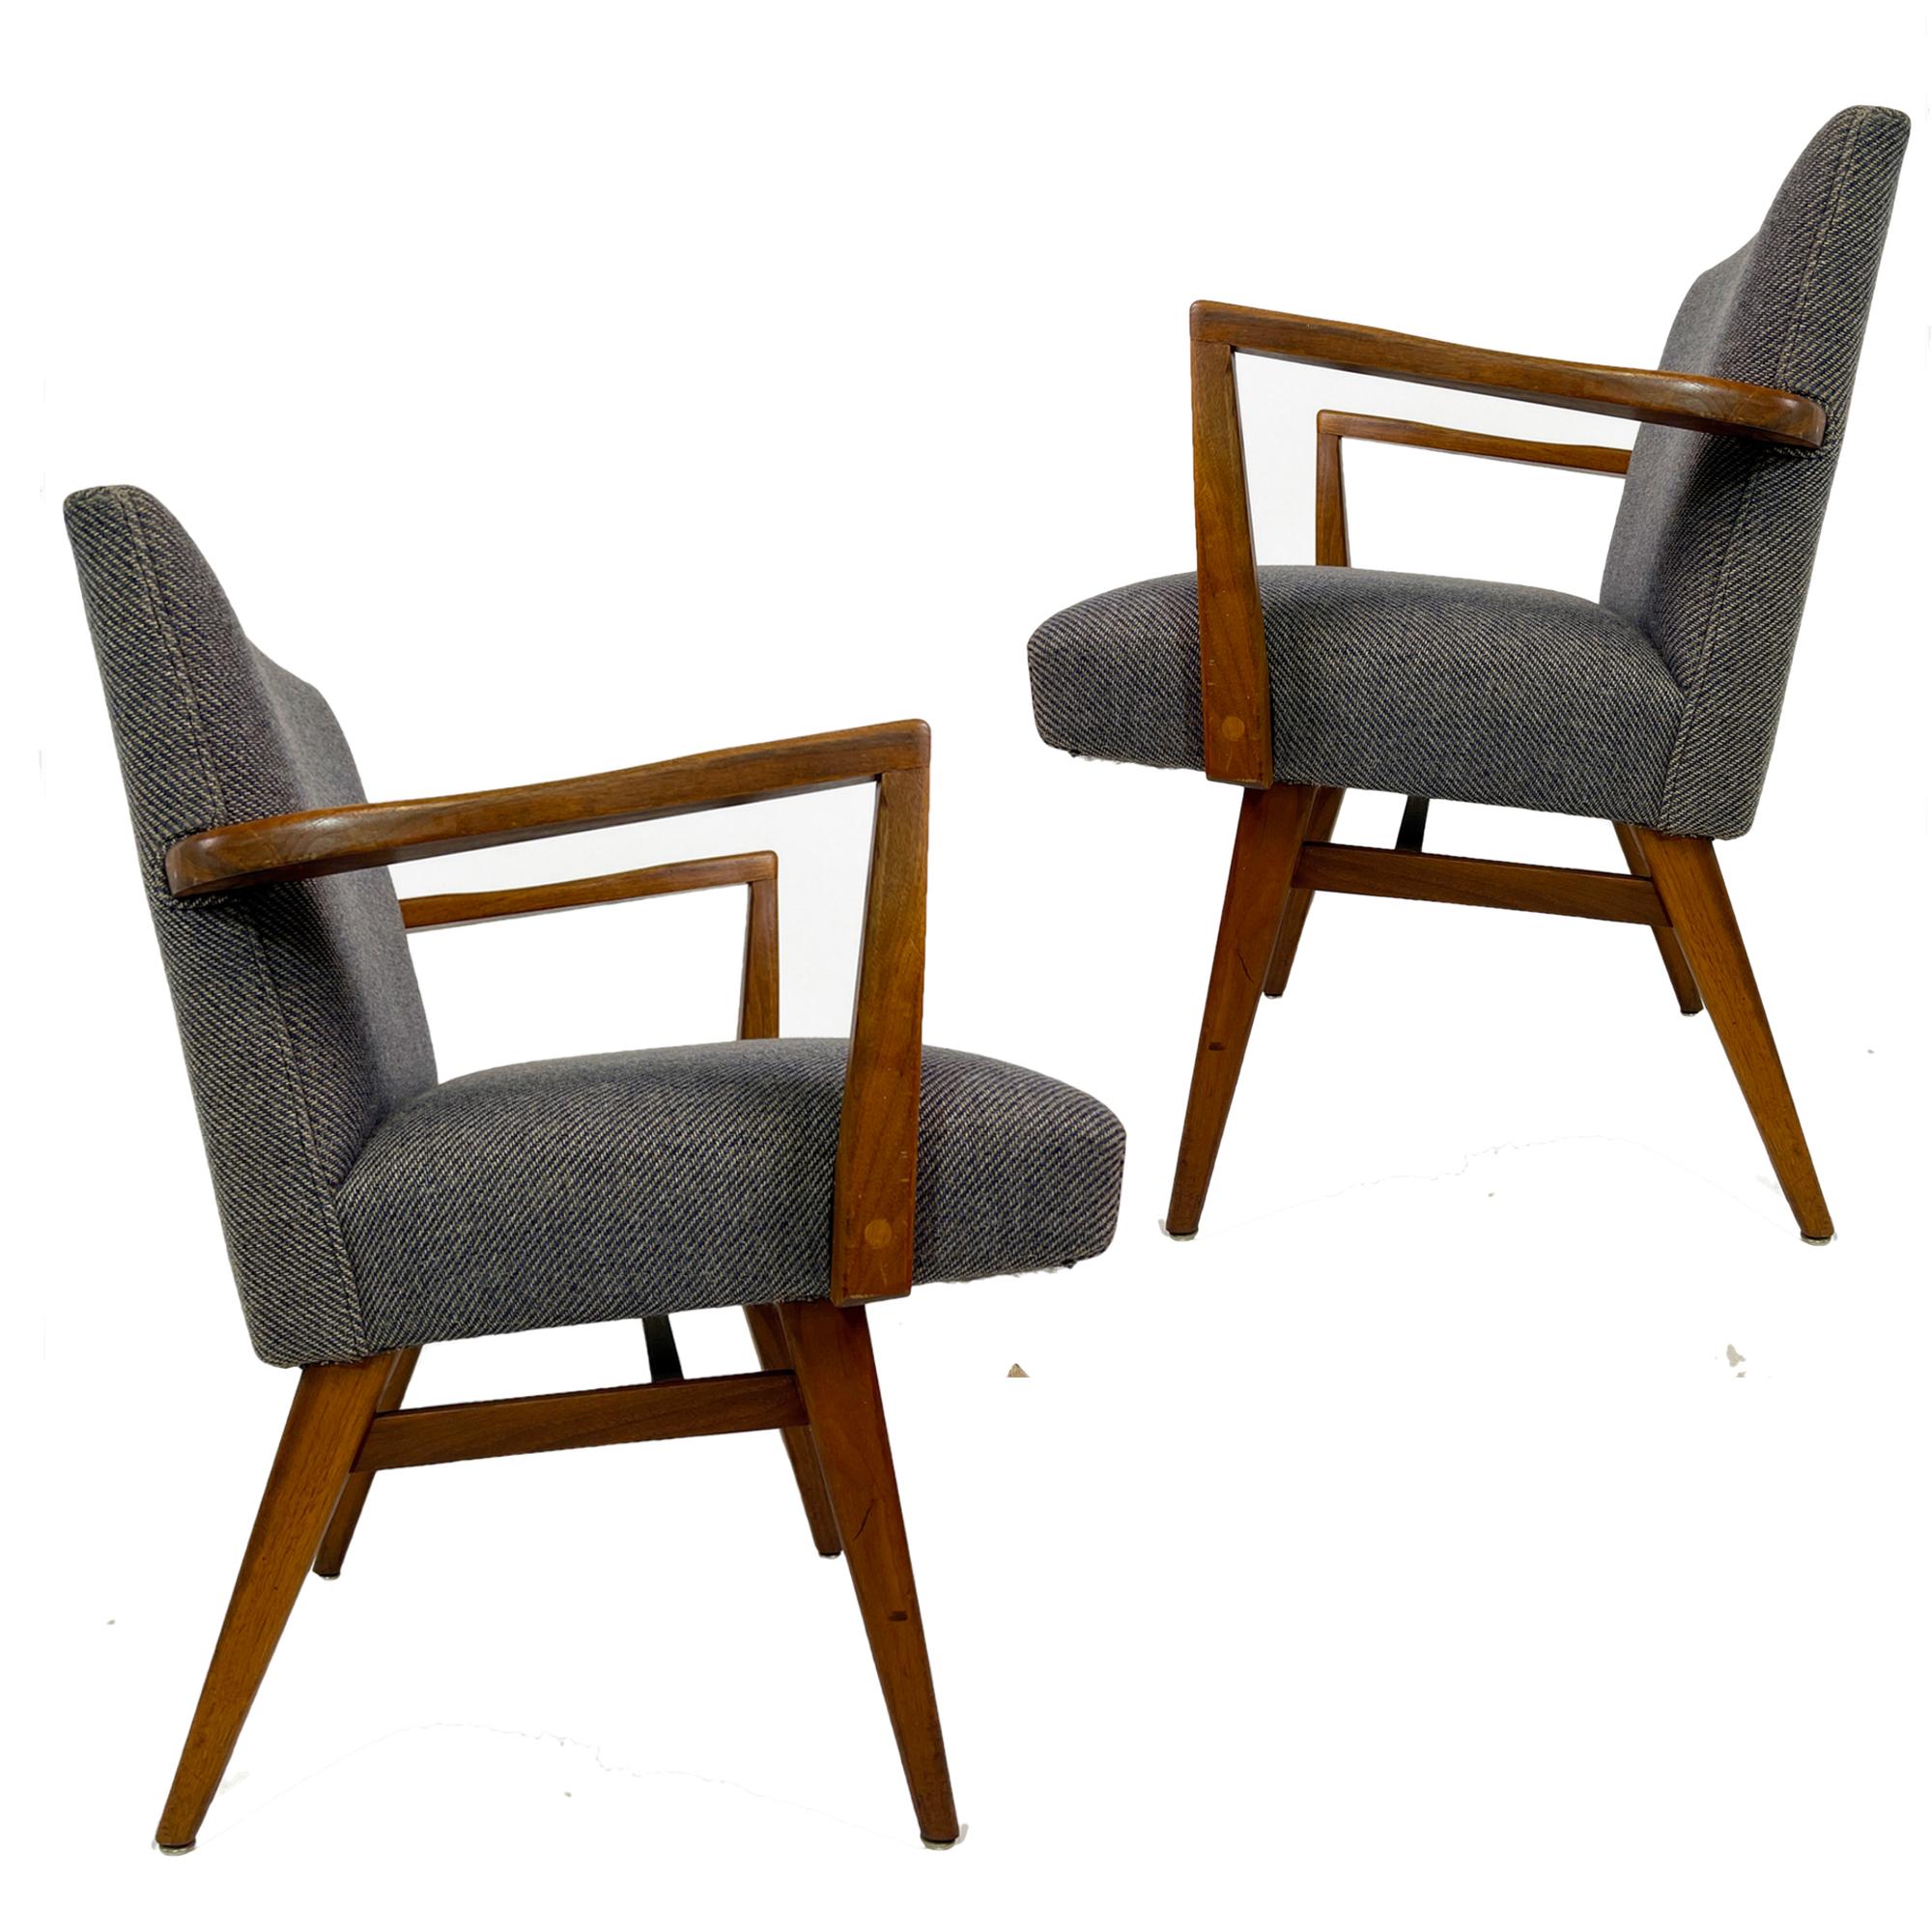 Set of 8 Jens Risom dining chairs. 6 side chairs model #205 side chairs, along with 2 armchairs of same line.
This is a really great unique style in that the height and construction is styled to be either a dining chair, a desk chair, or can be